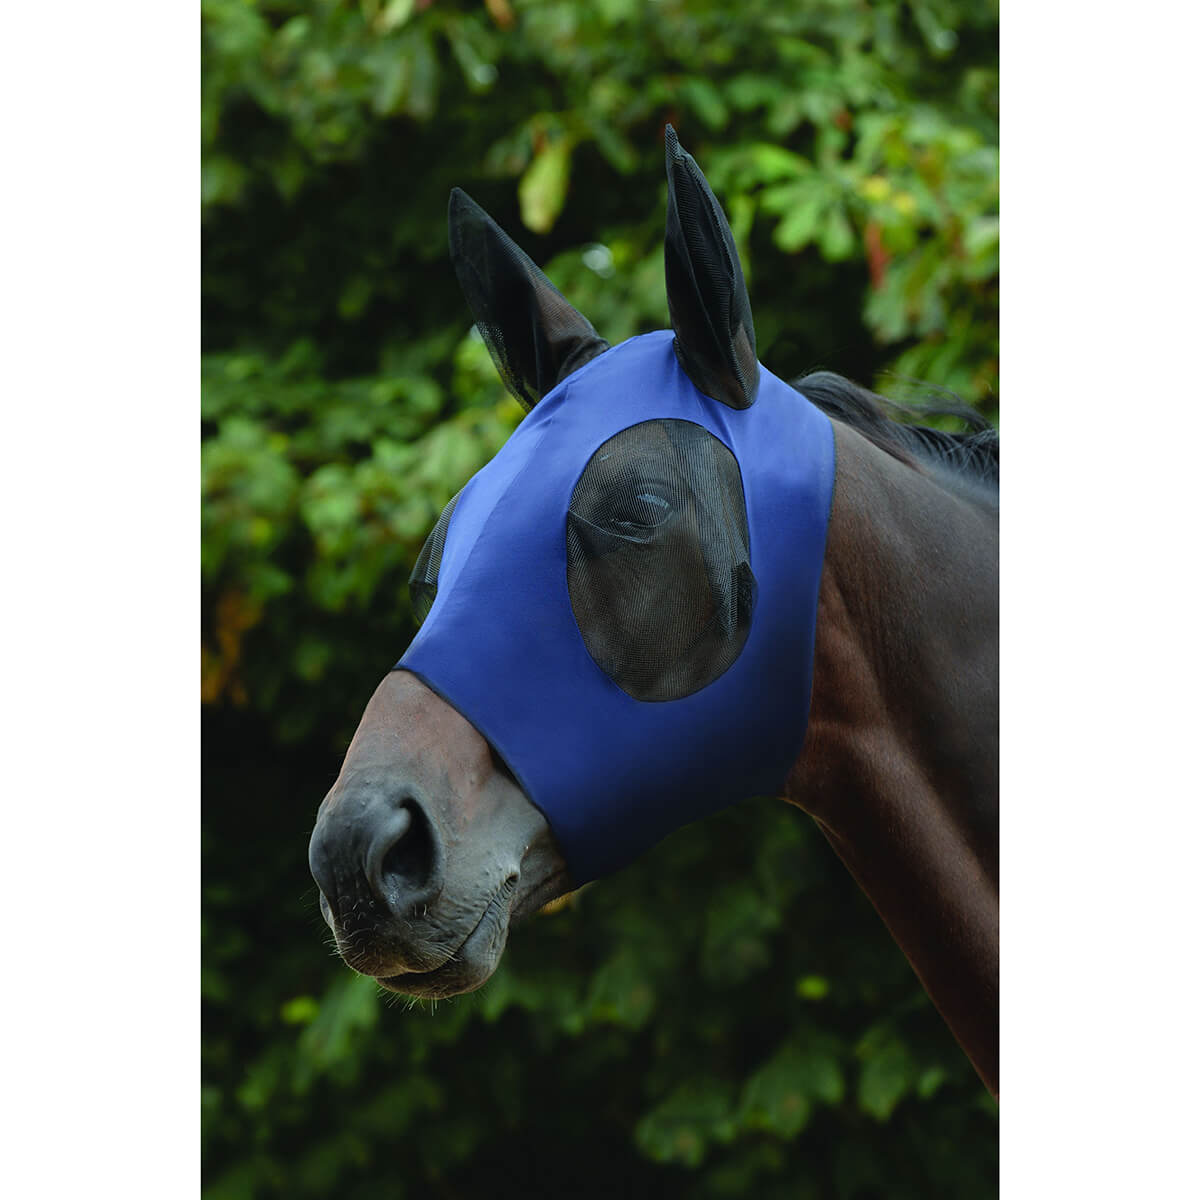 Fly Mask - Stretch Bug Eye Saver with Ears - Navy - Full